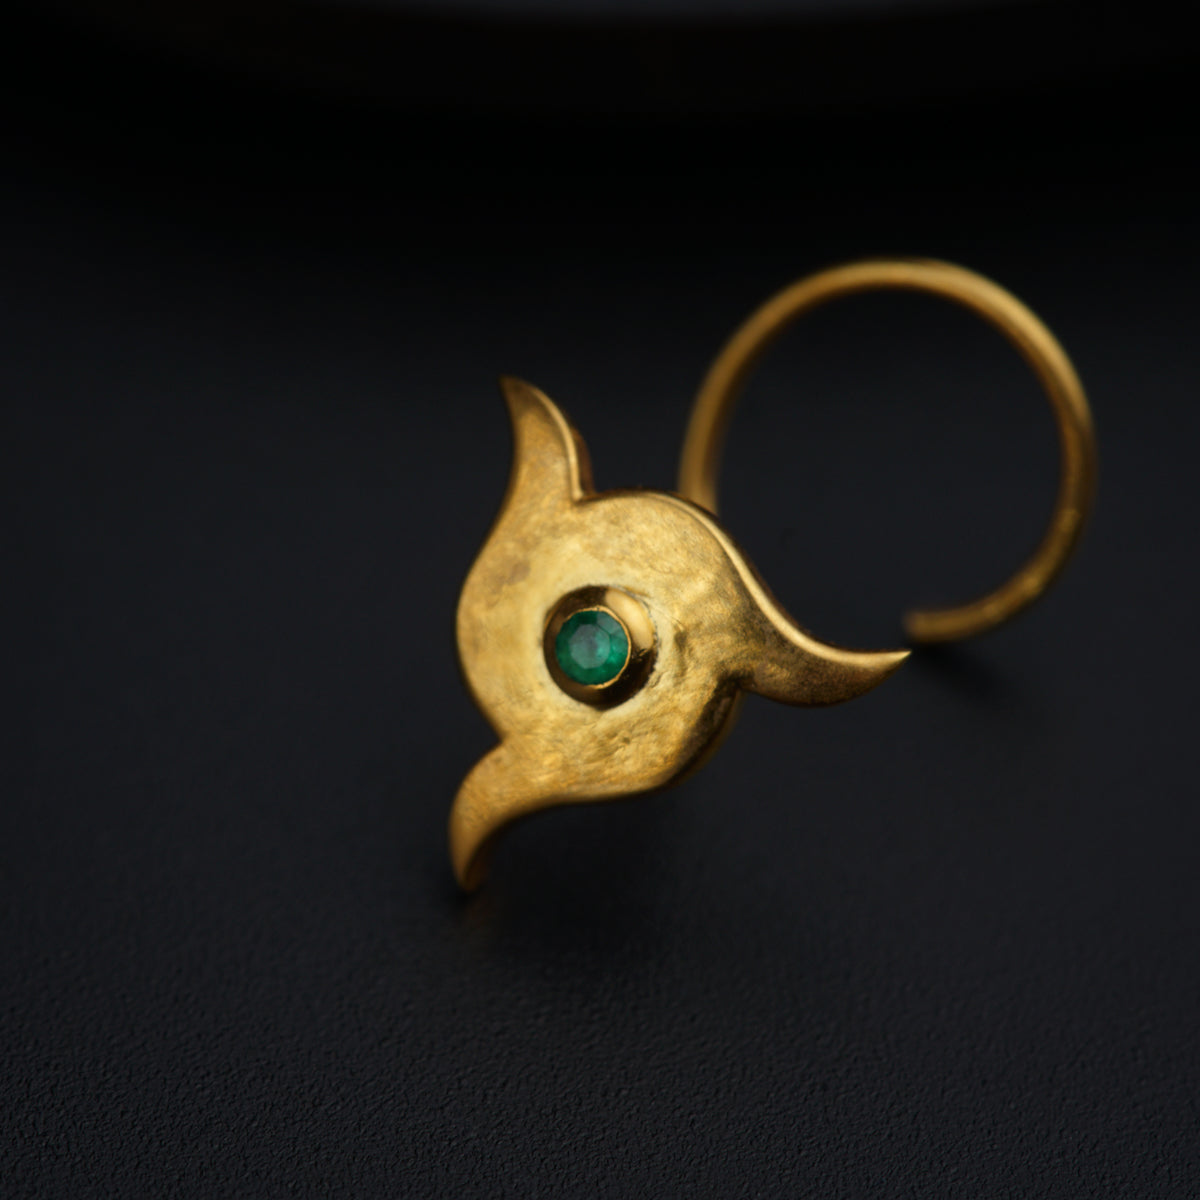 a close up of a gold ring with a green stone